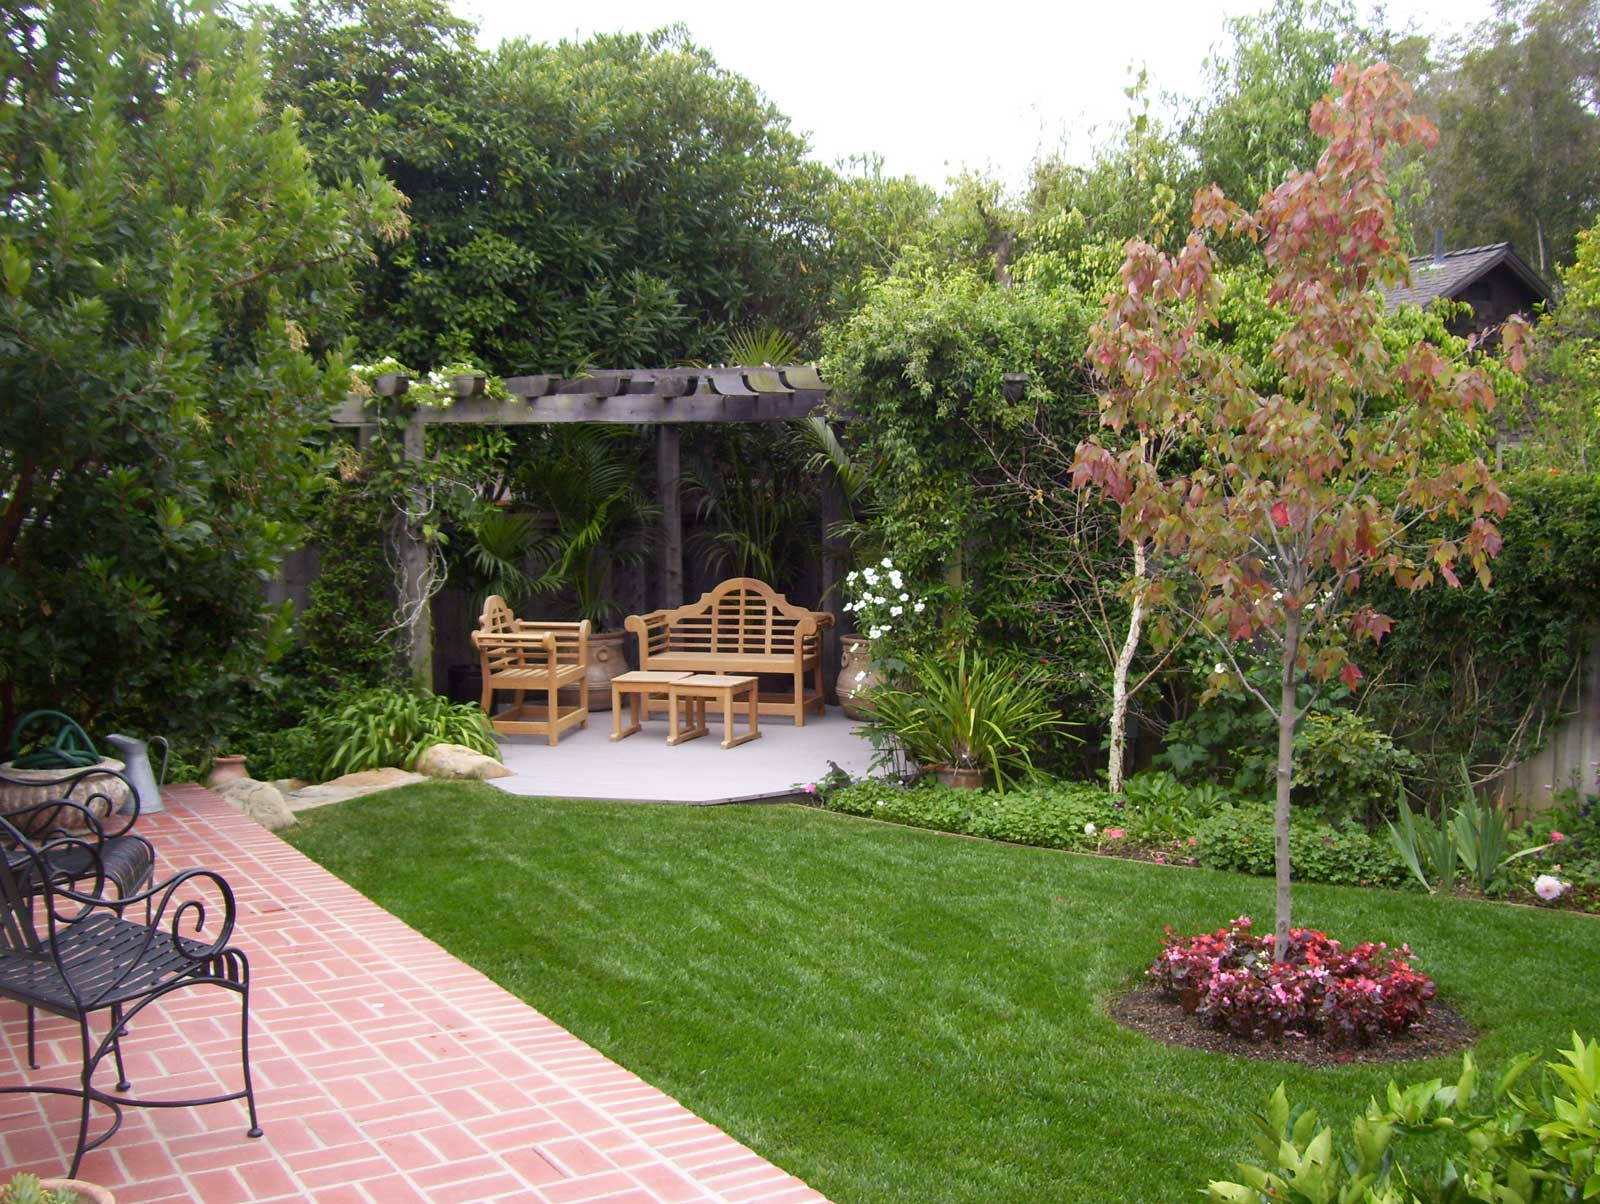 Patio Landscaping Designs Inspirational Backyard Landscape Ideas with Natural touch for Modern